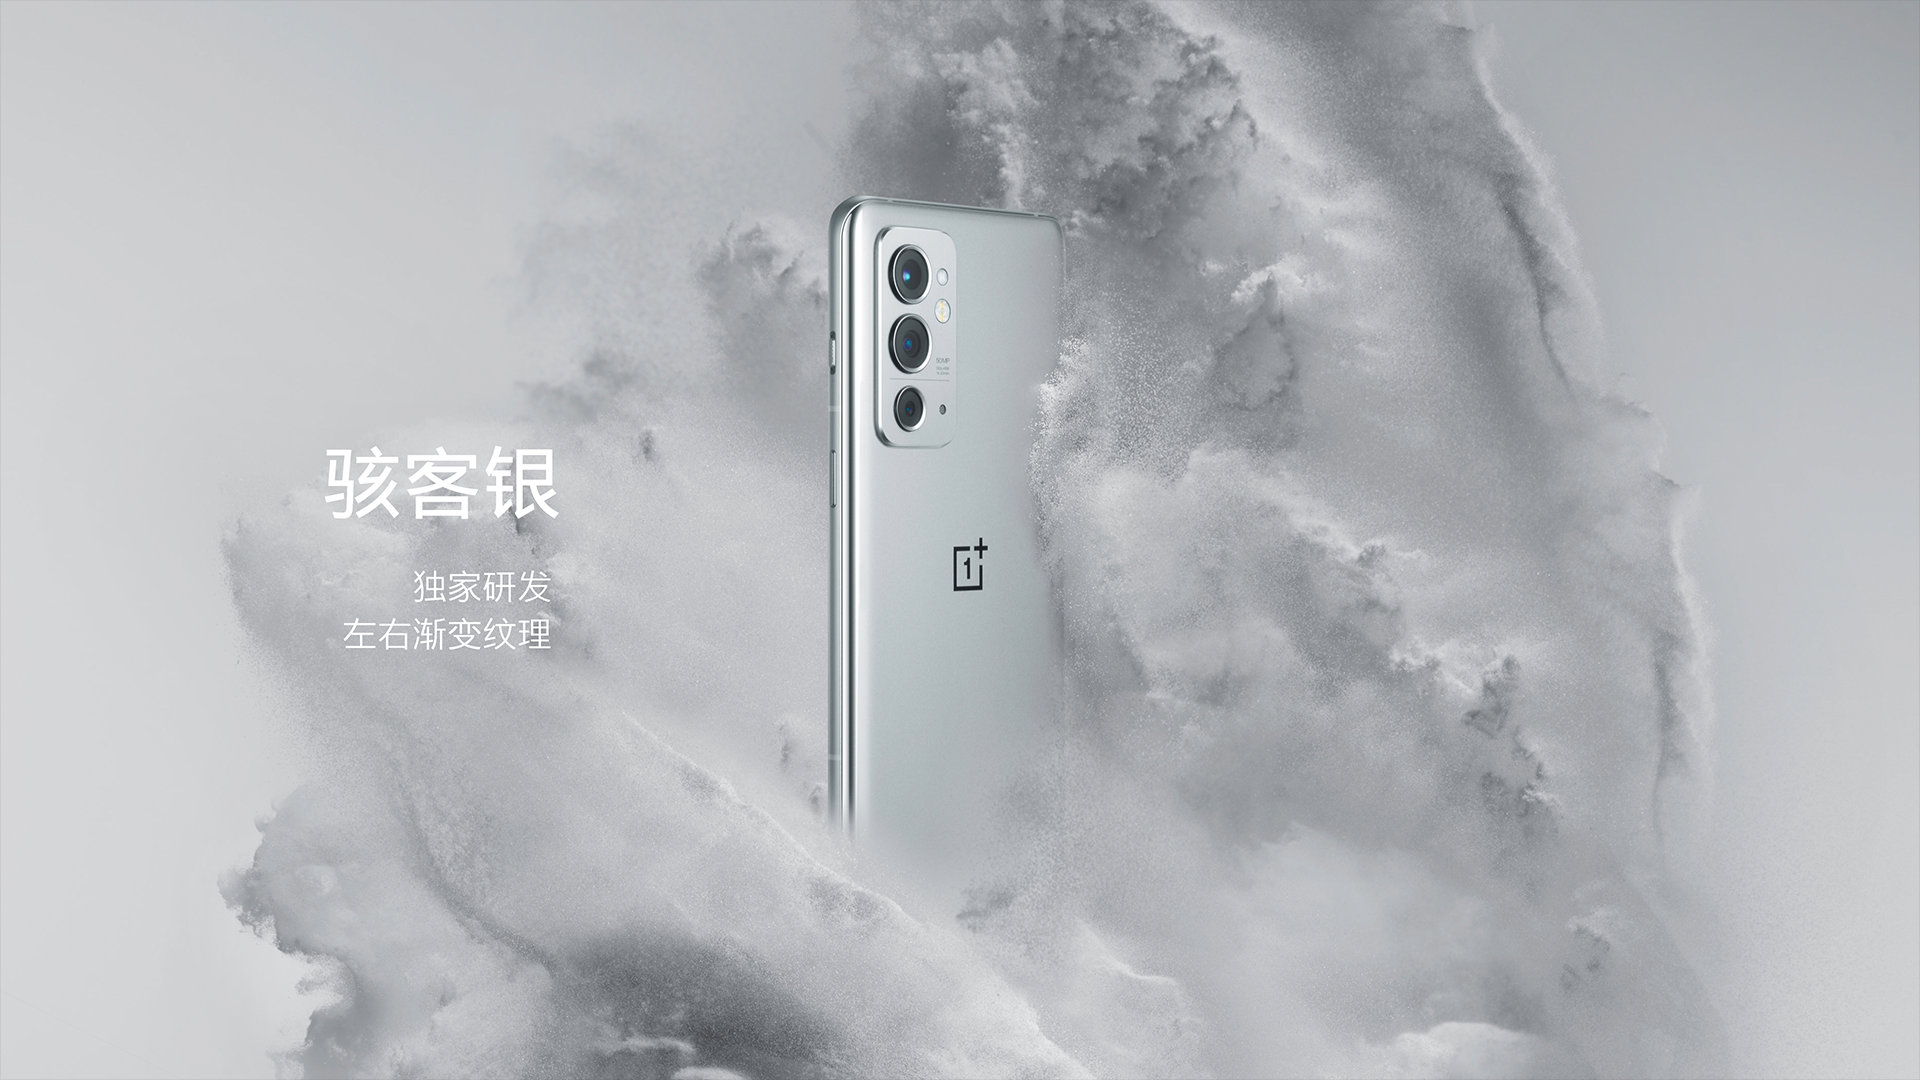 OnePlus 9RT brought in $15.6 million in 5 minutes